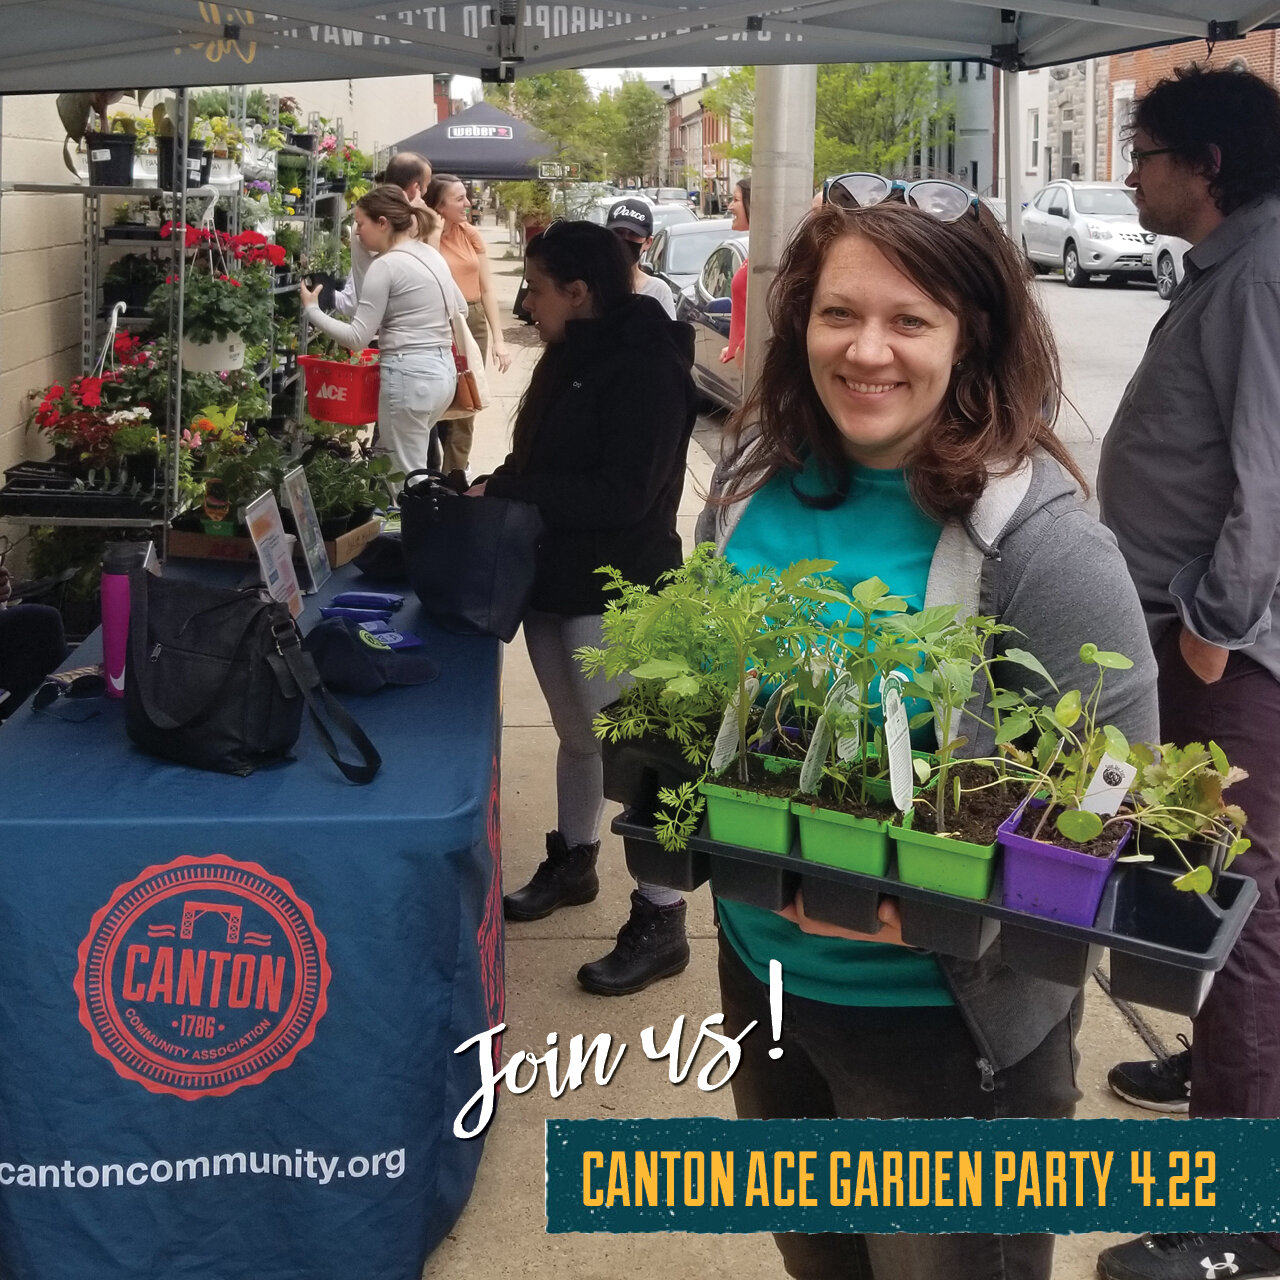 Canton Ace Garden Party
Canton Ace Hardware (@cool_hardware) is hosting its Annual Garden Party on April 22 from 10 am-2 pm and the Canton Community Association is going to be there. Look for our booth outside! The event will feature local gardening 